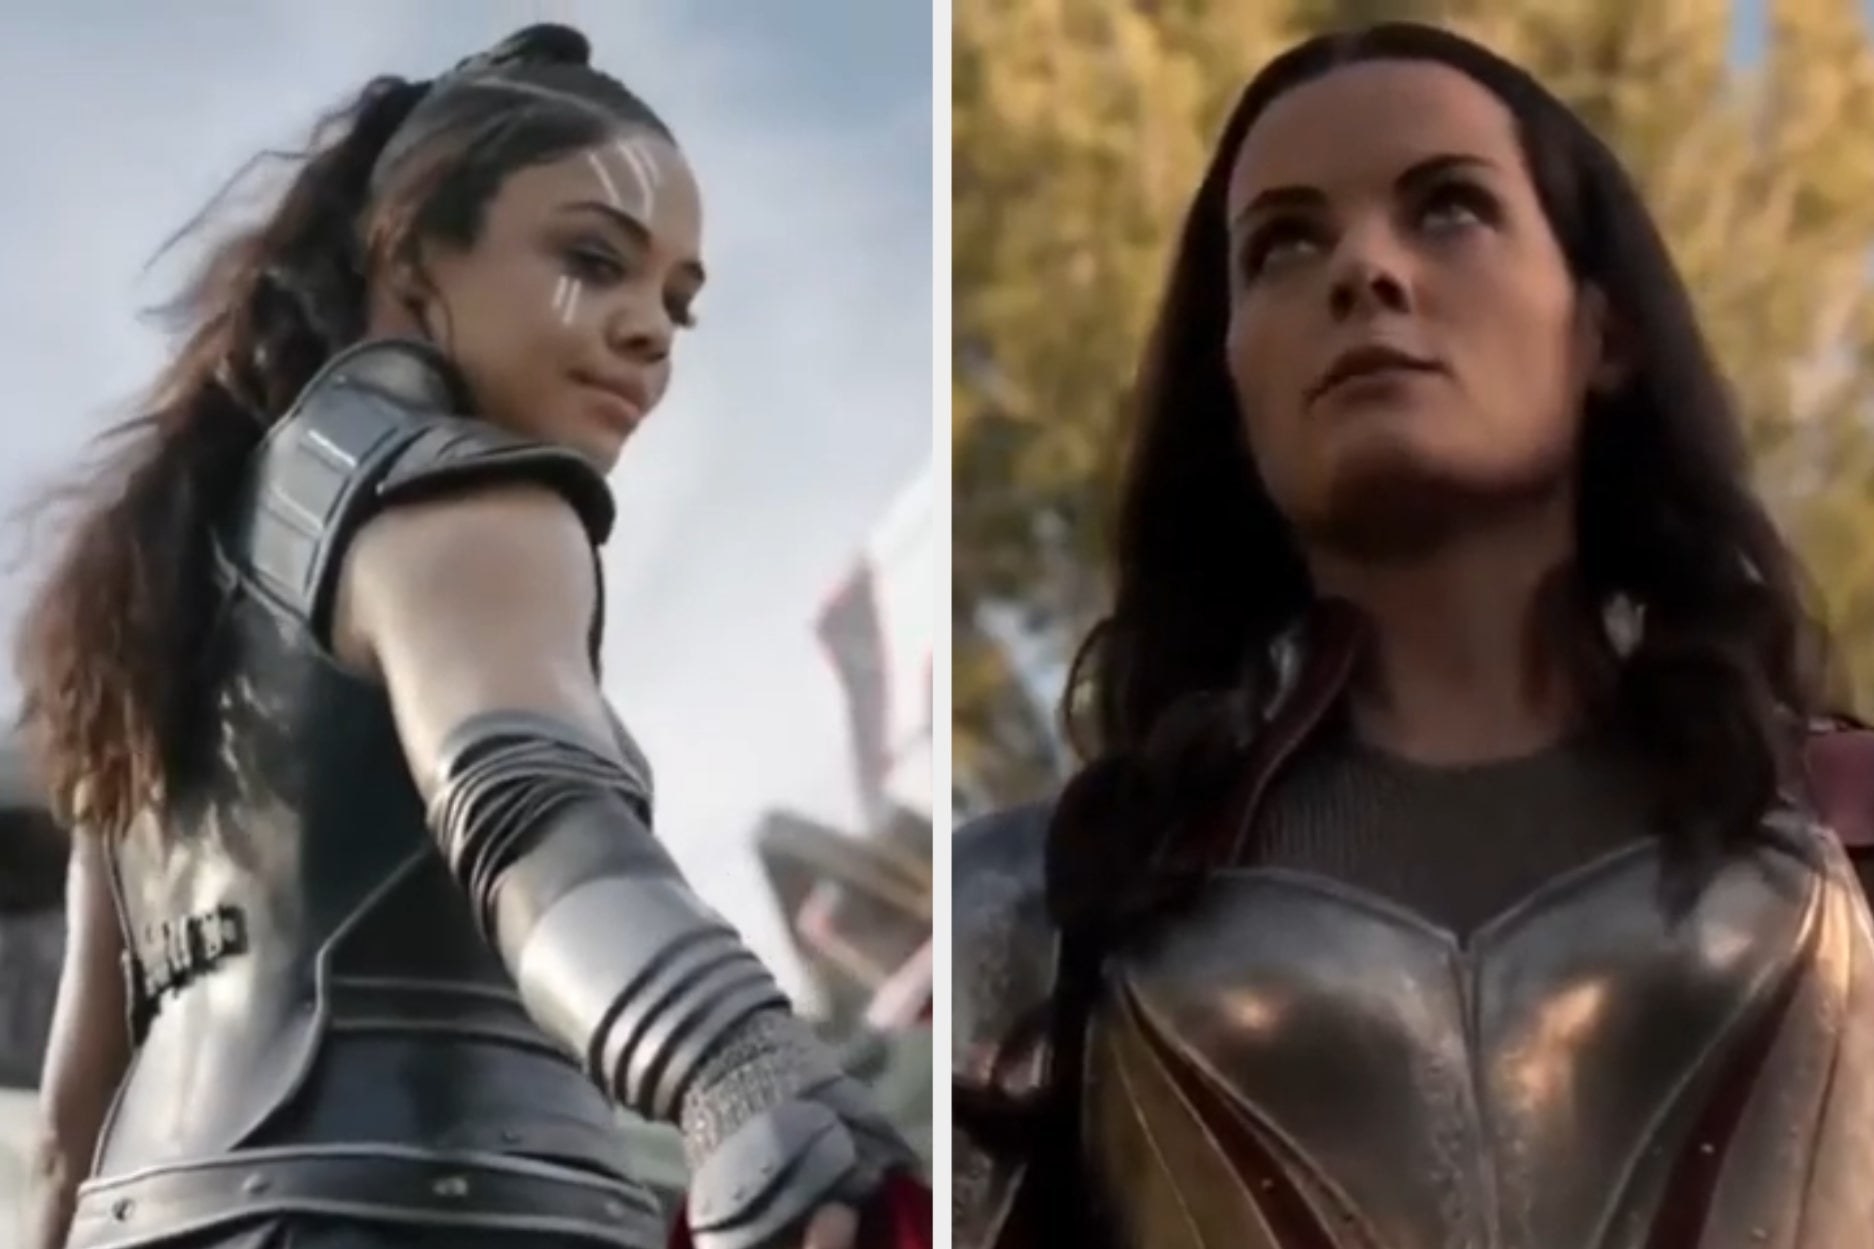 Valkyrie looking down on someone in &quot;Thor: Ragnarok&quot;/Lady Sif with an explosion behind her